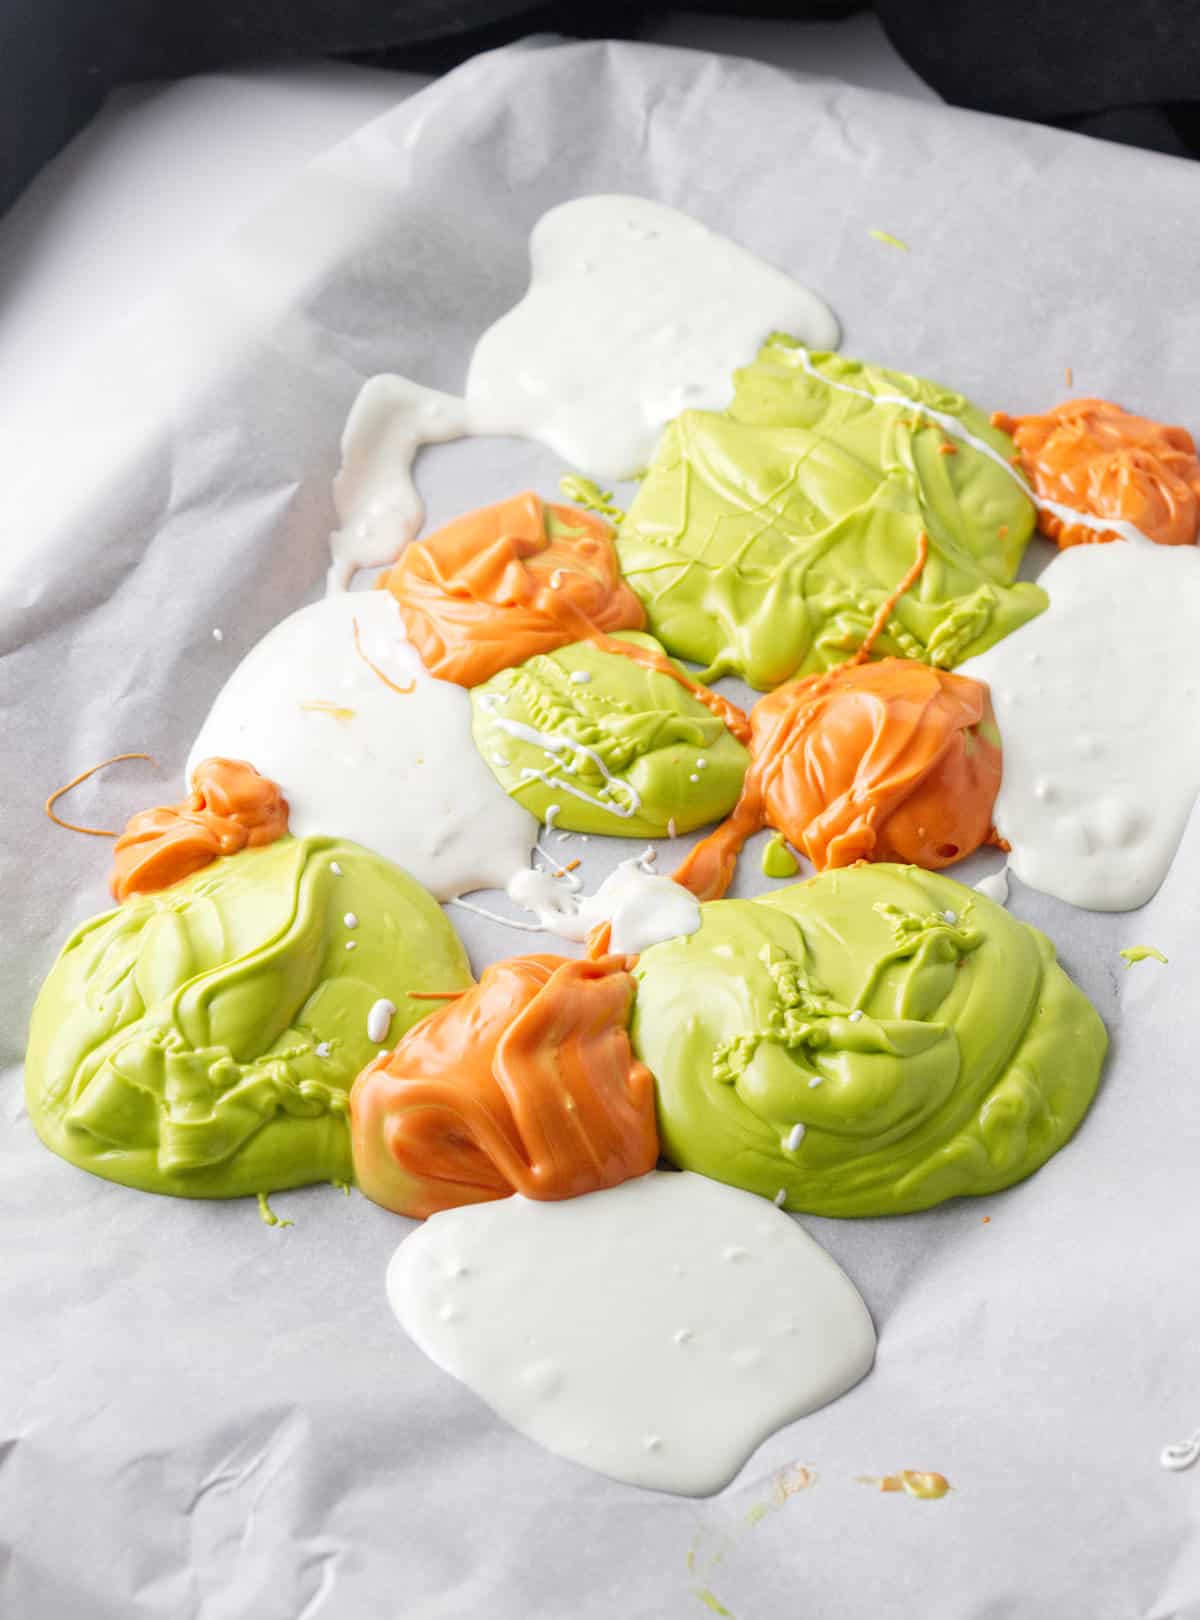 melted candy melts dolloped on a tray covered with parchment paper.